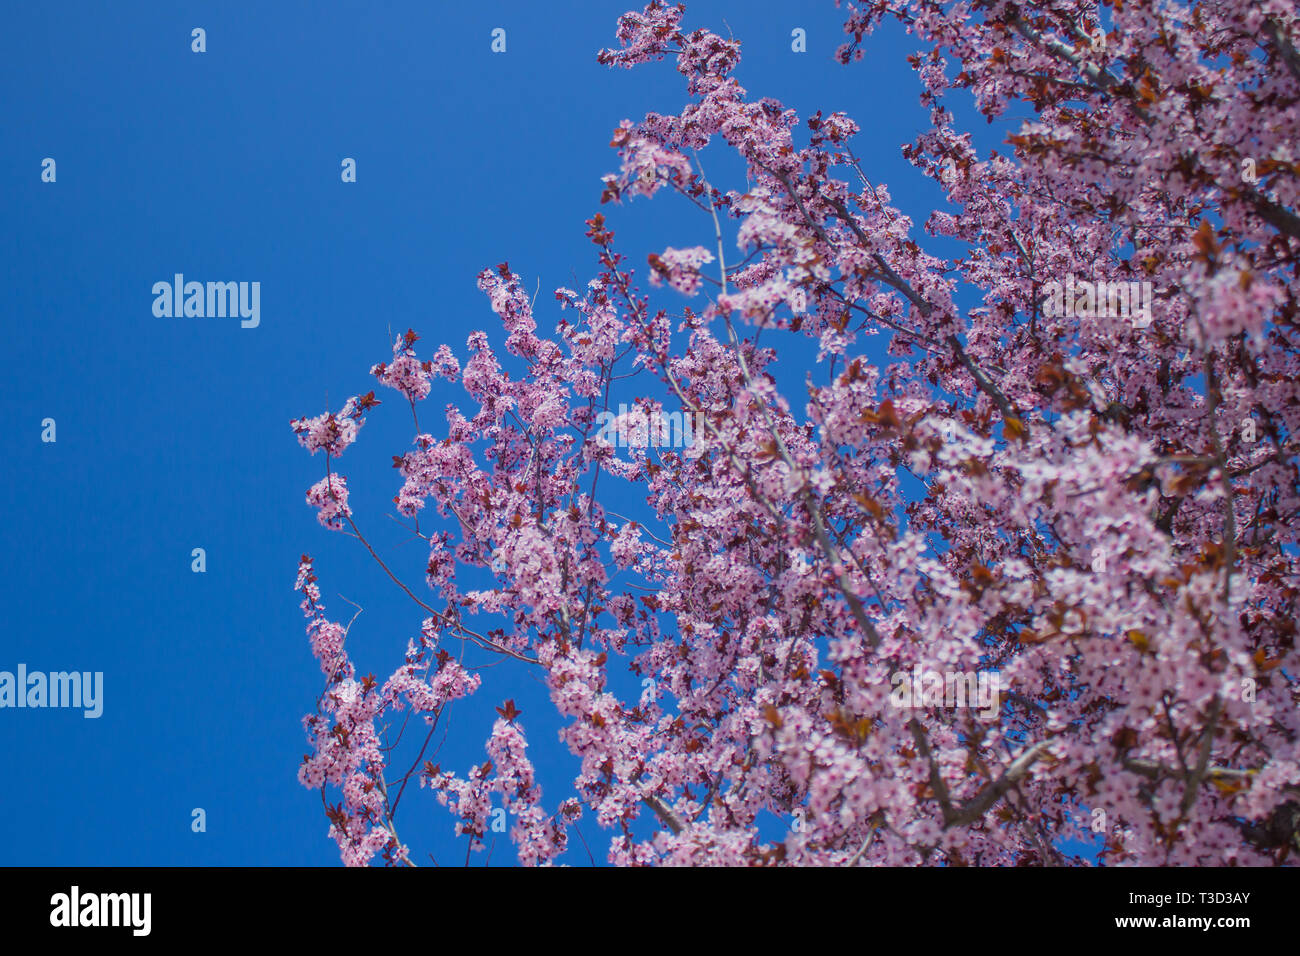 Branch With Pink Sakura Blossoms And Blue Sky Background Blooming